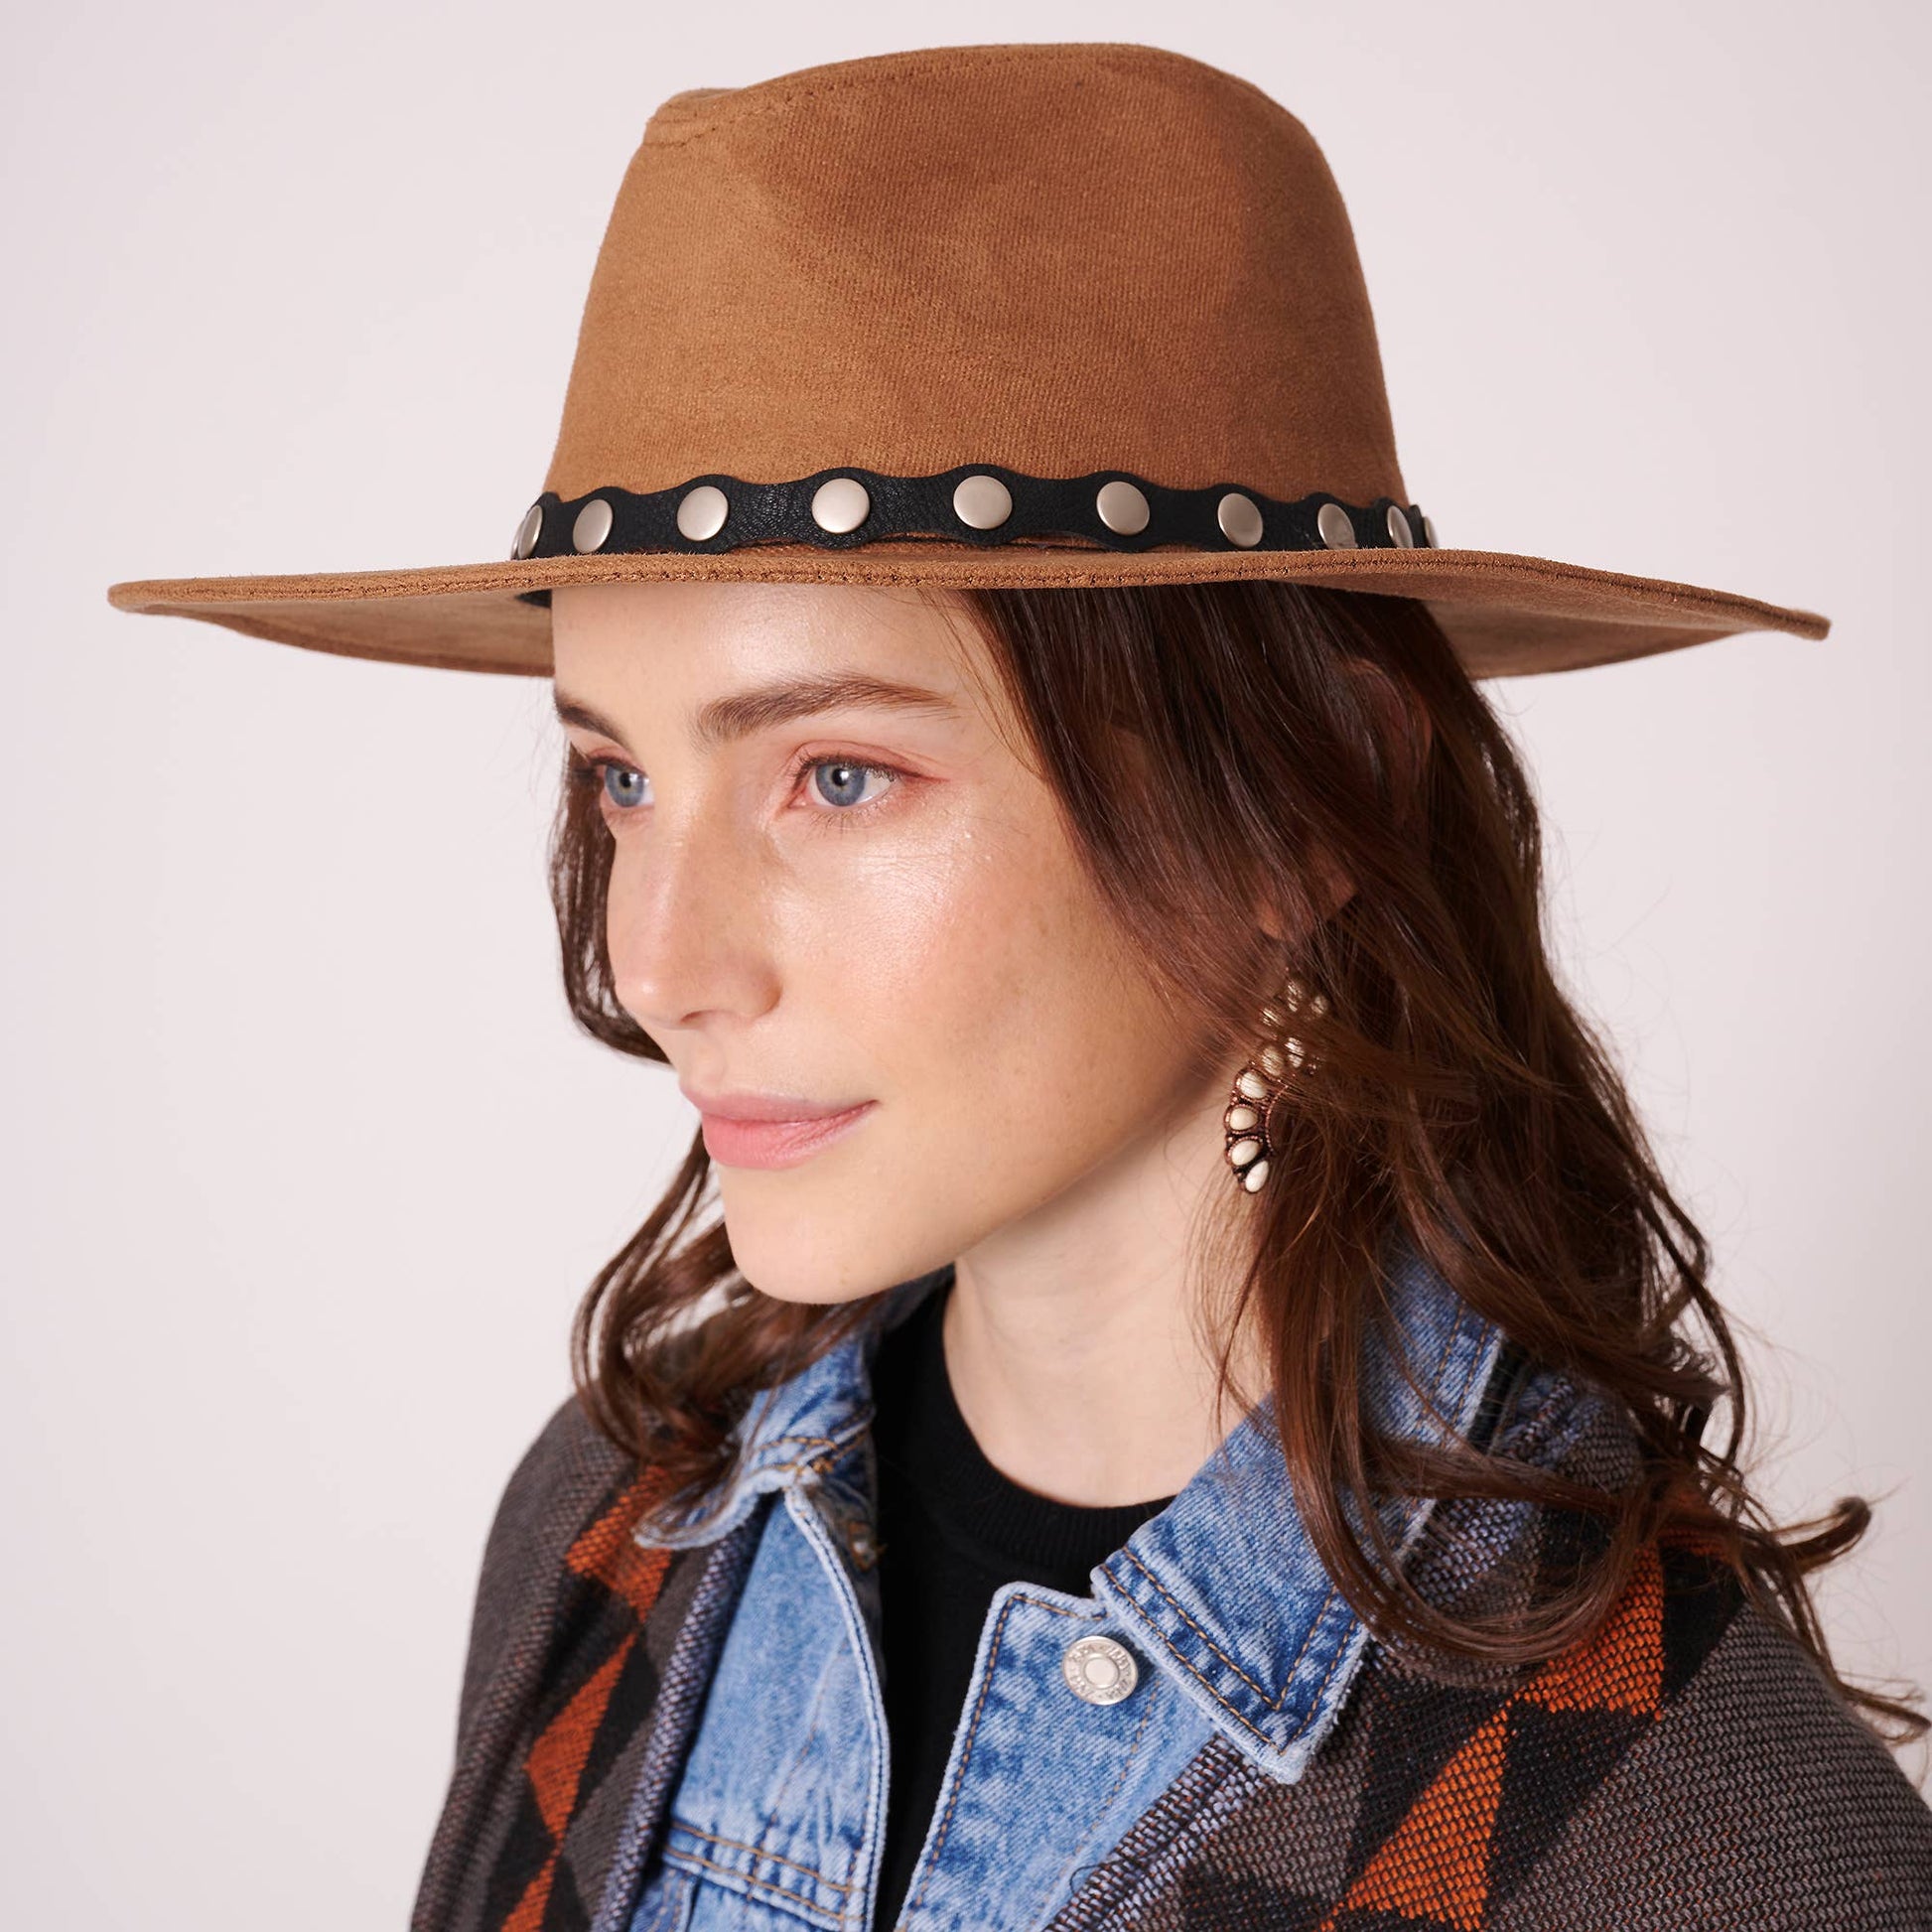 Suede Rancher Hat with Leather Tie Strap - CACTI & CAMO